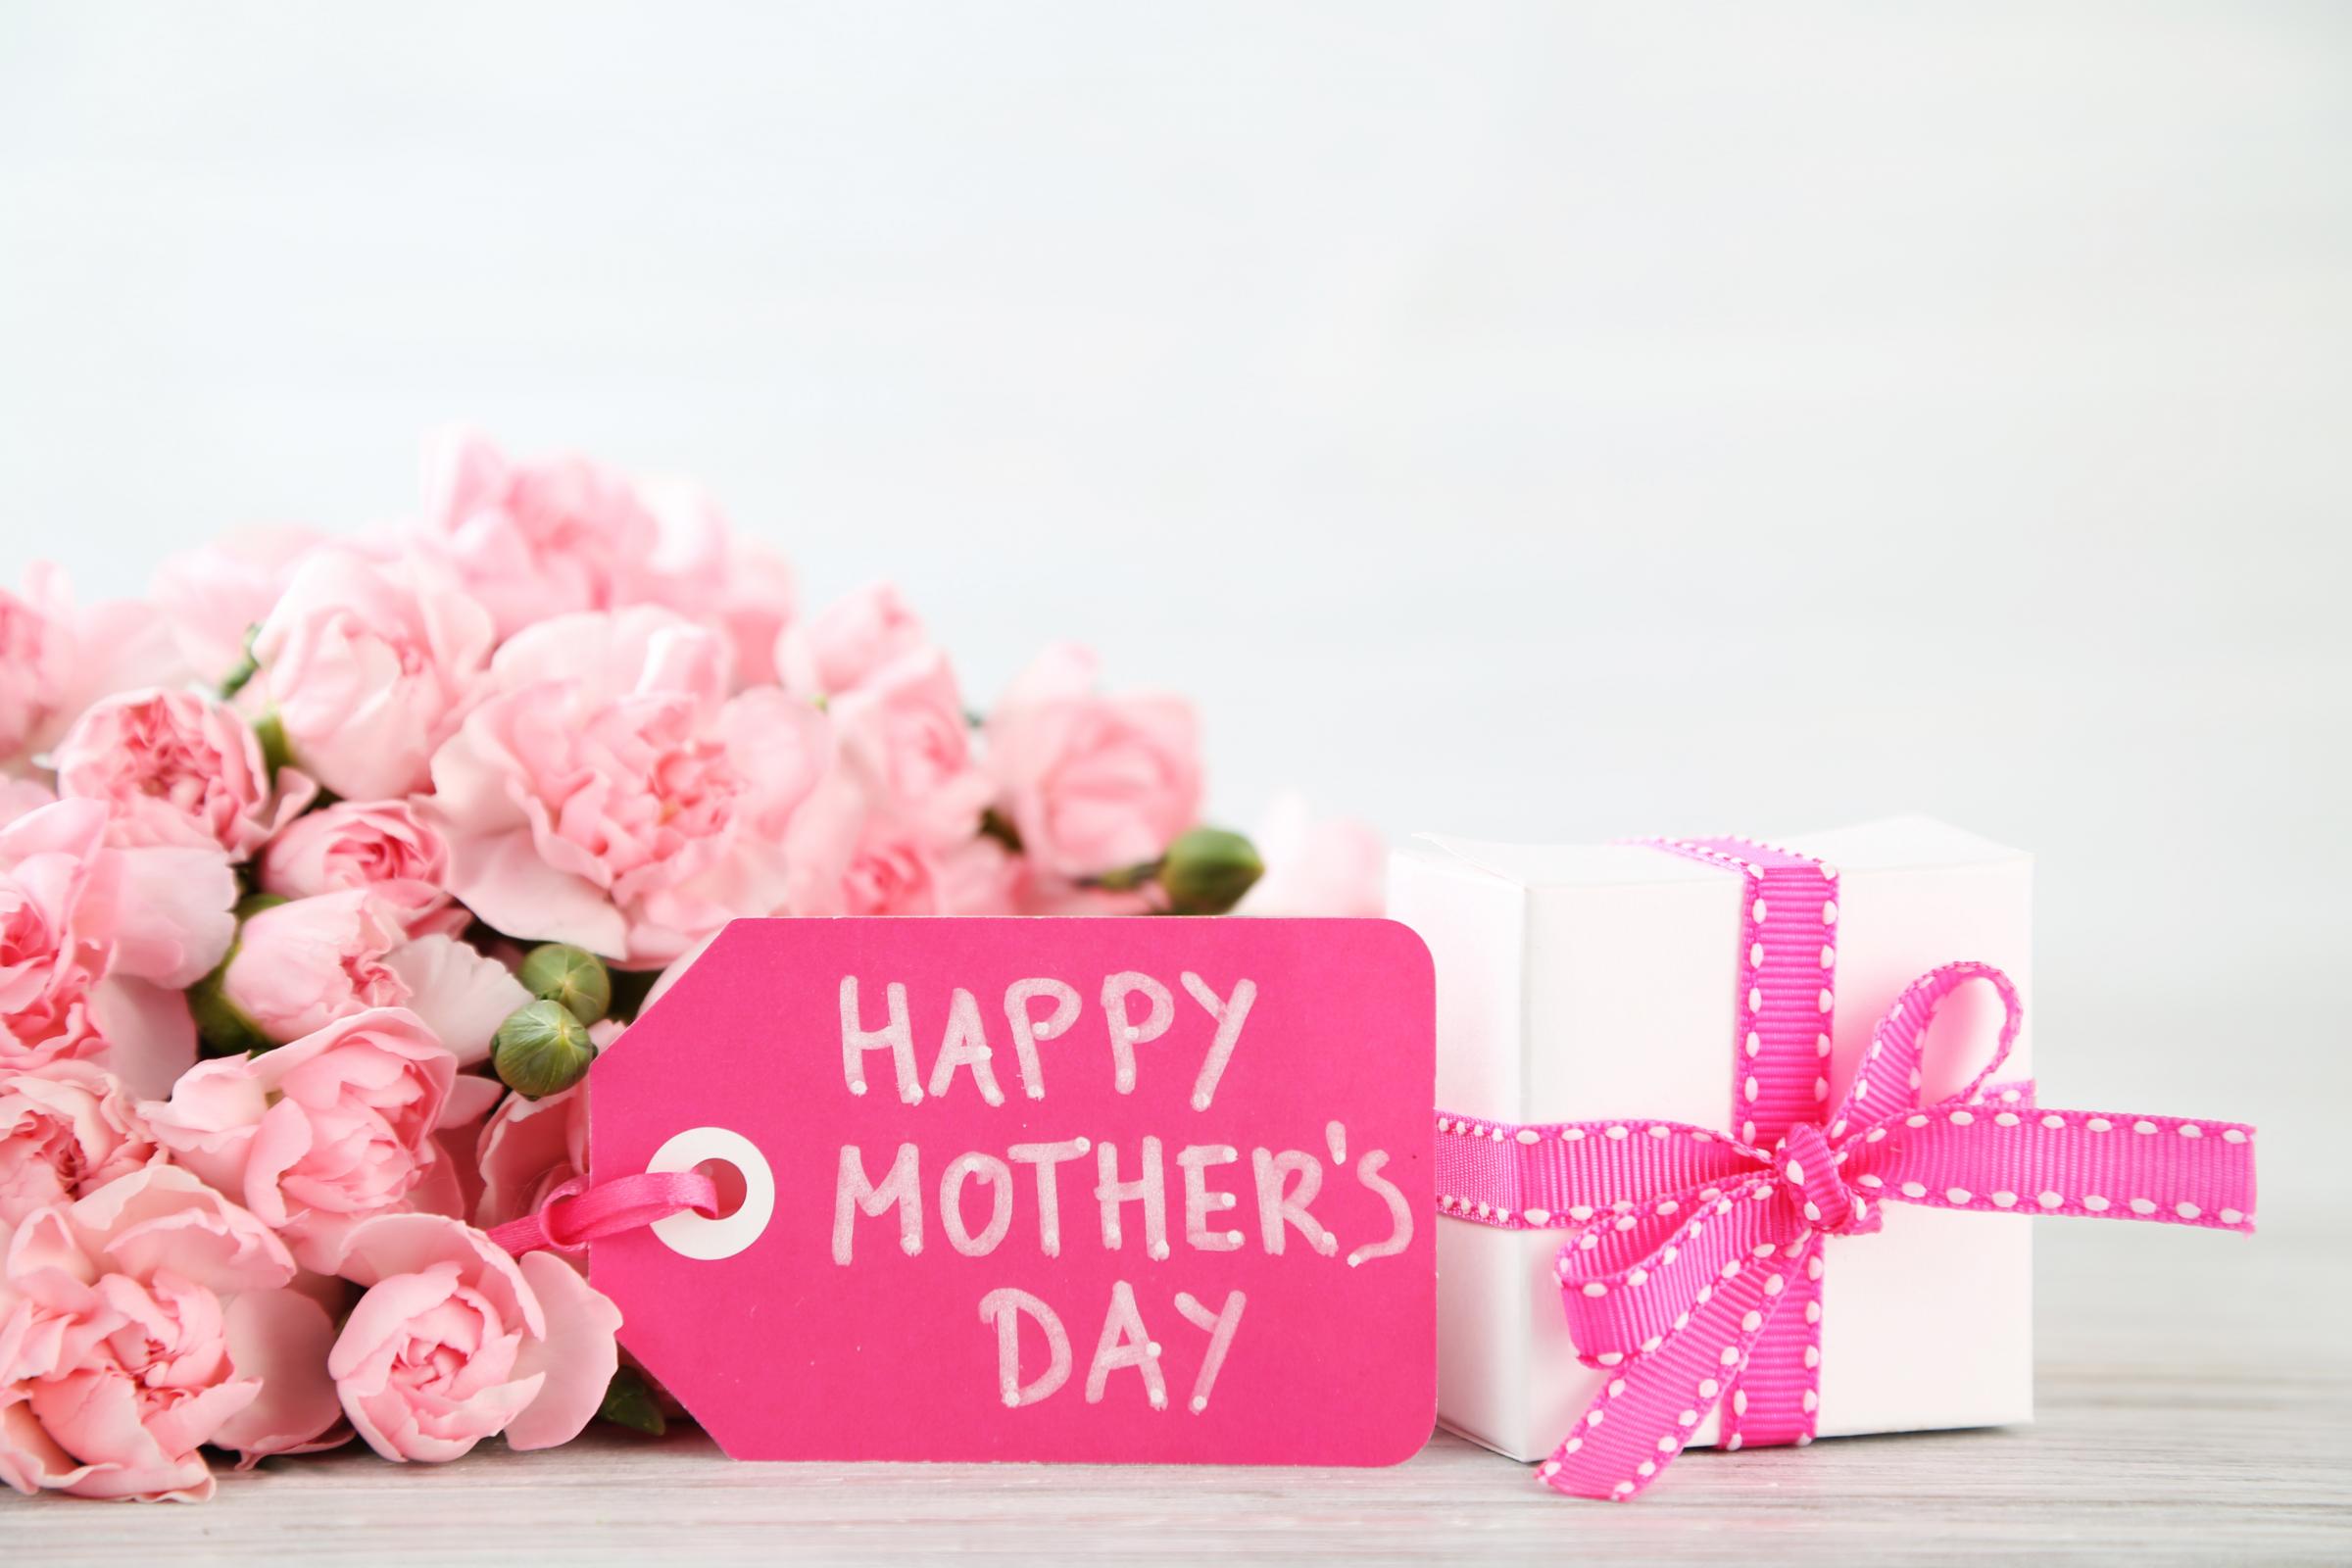 Mums can expect a cheap Mother's Day as Southampton tops list of bargain hunters - Daily Echo